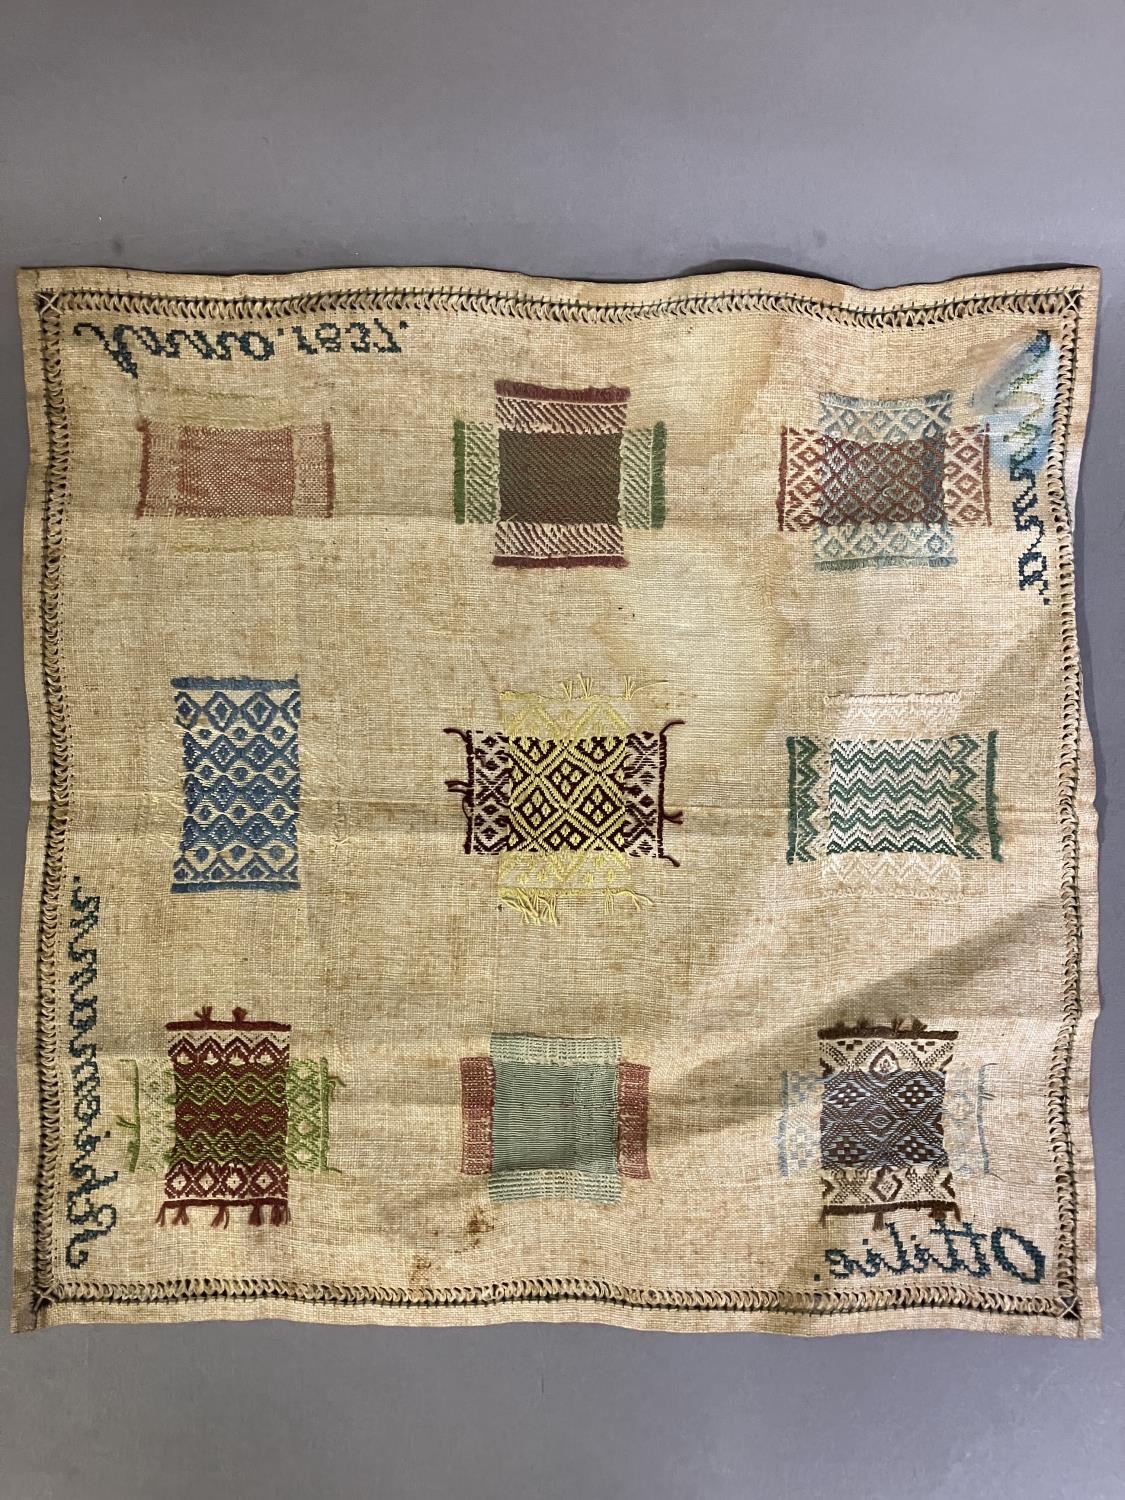 A Fine Antique Darning sampler, Dutch or German, worked on linen with silk threads, dated 1837,